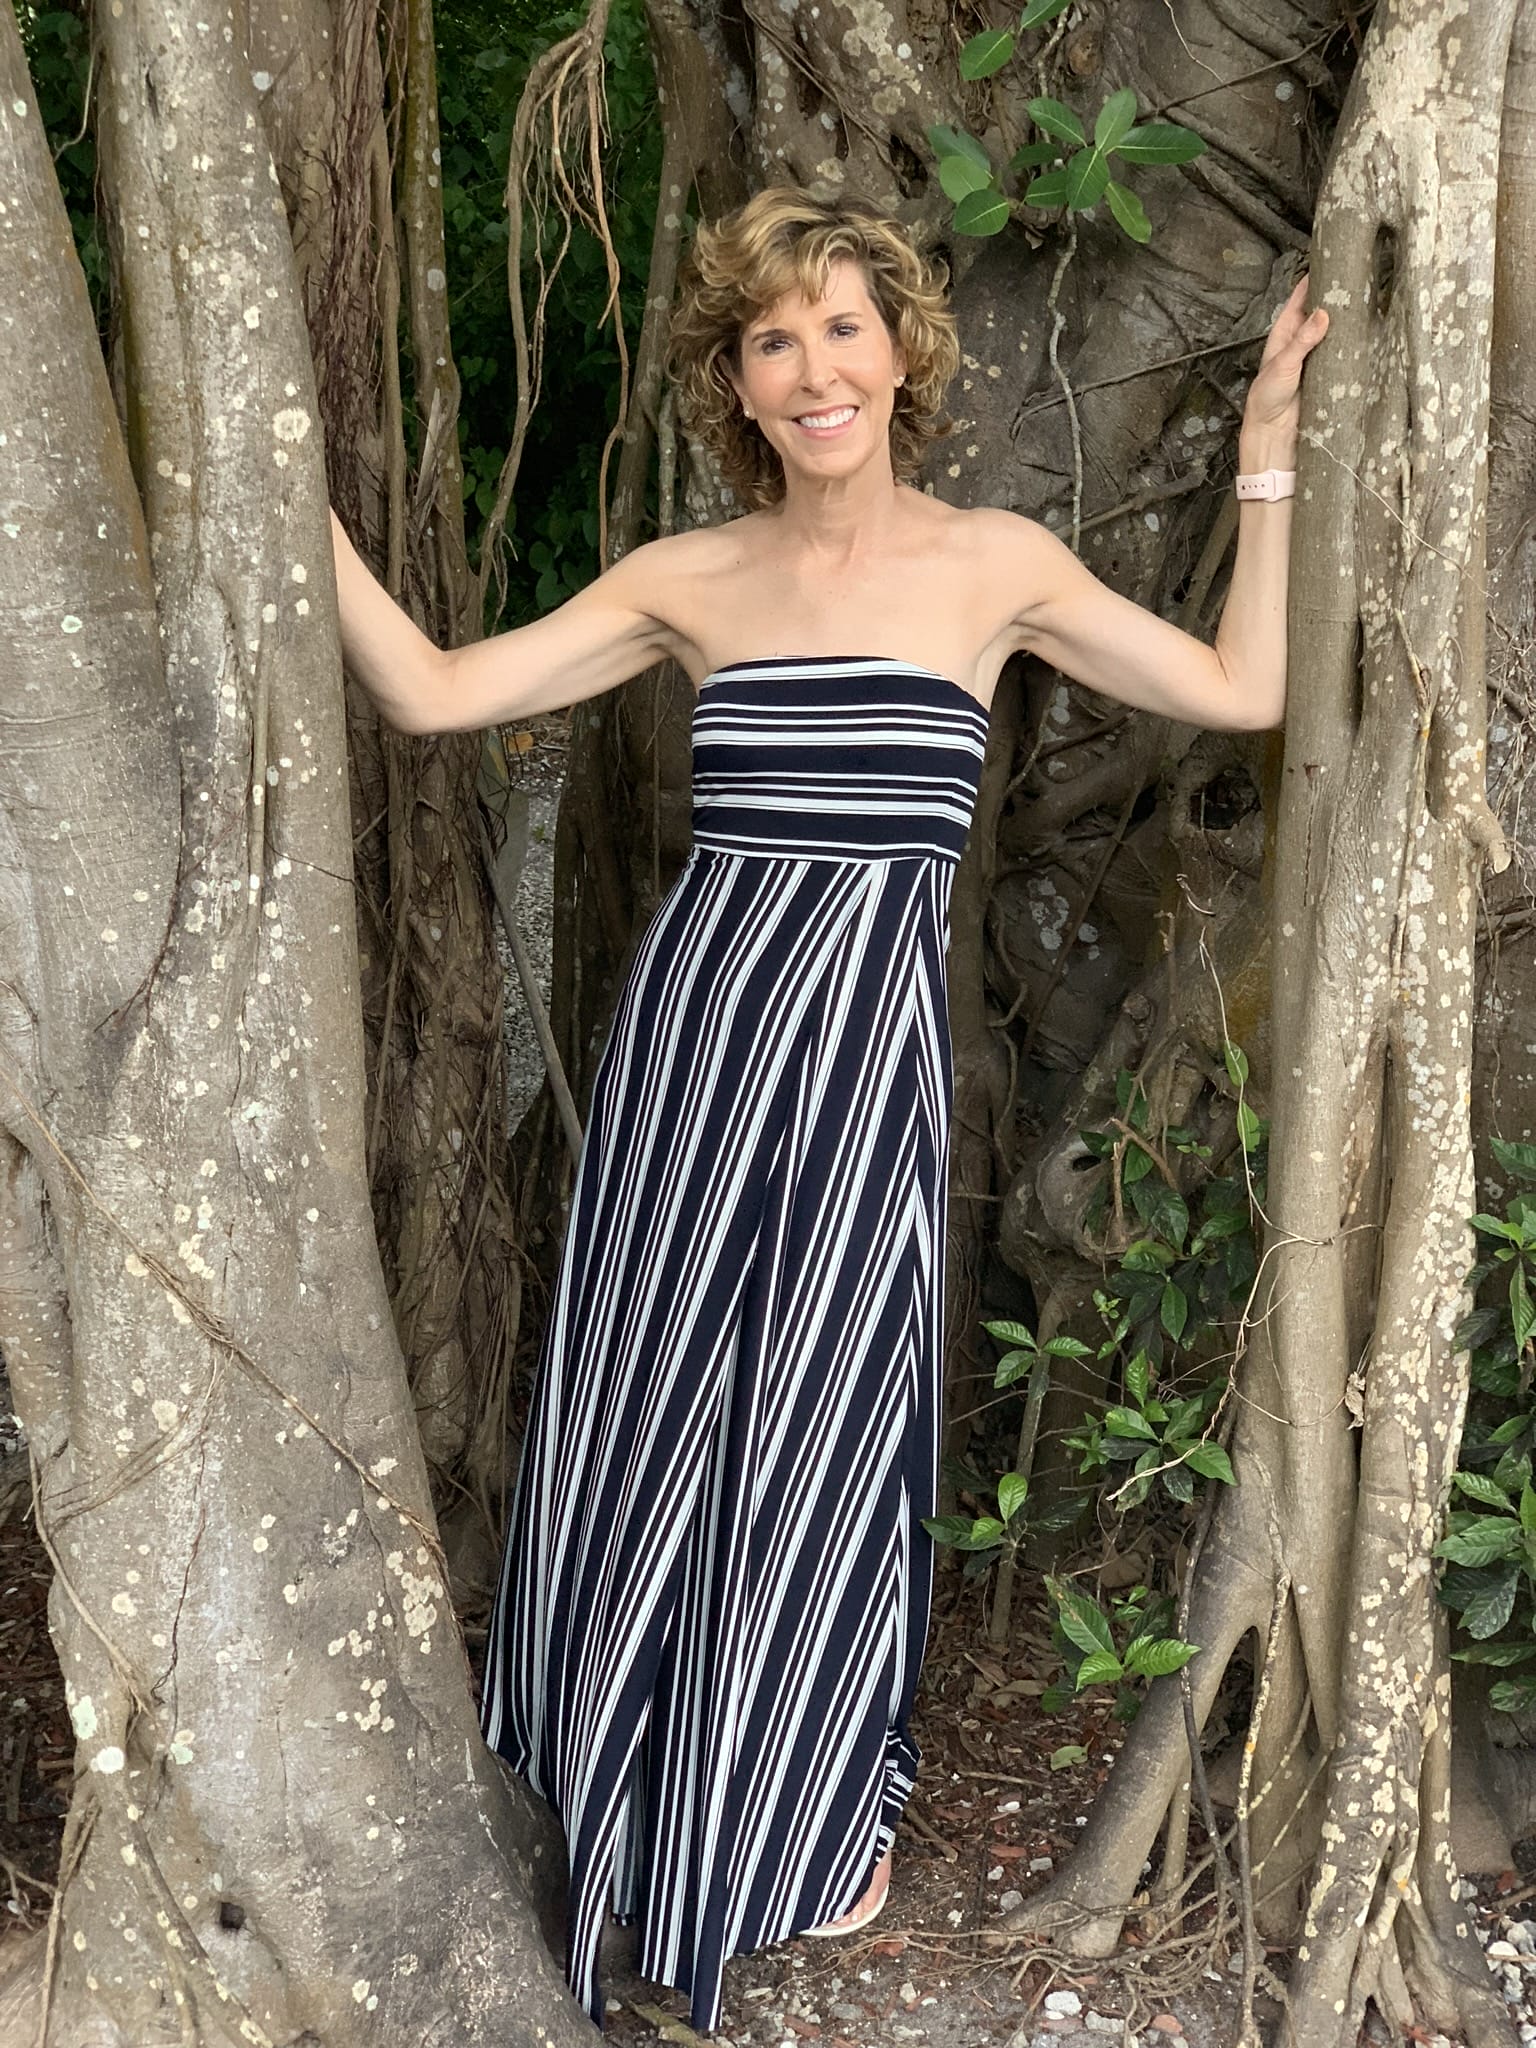 woman wearing blue and white maxi dress standing inside a tree trunk